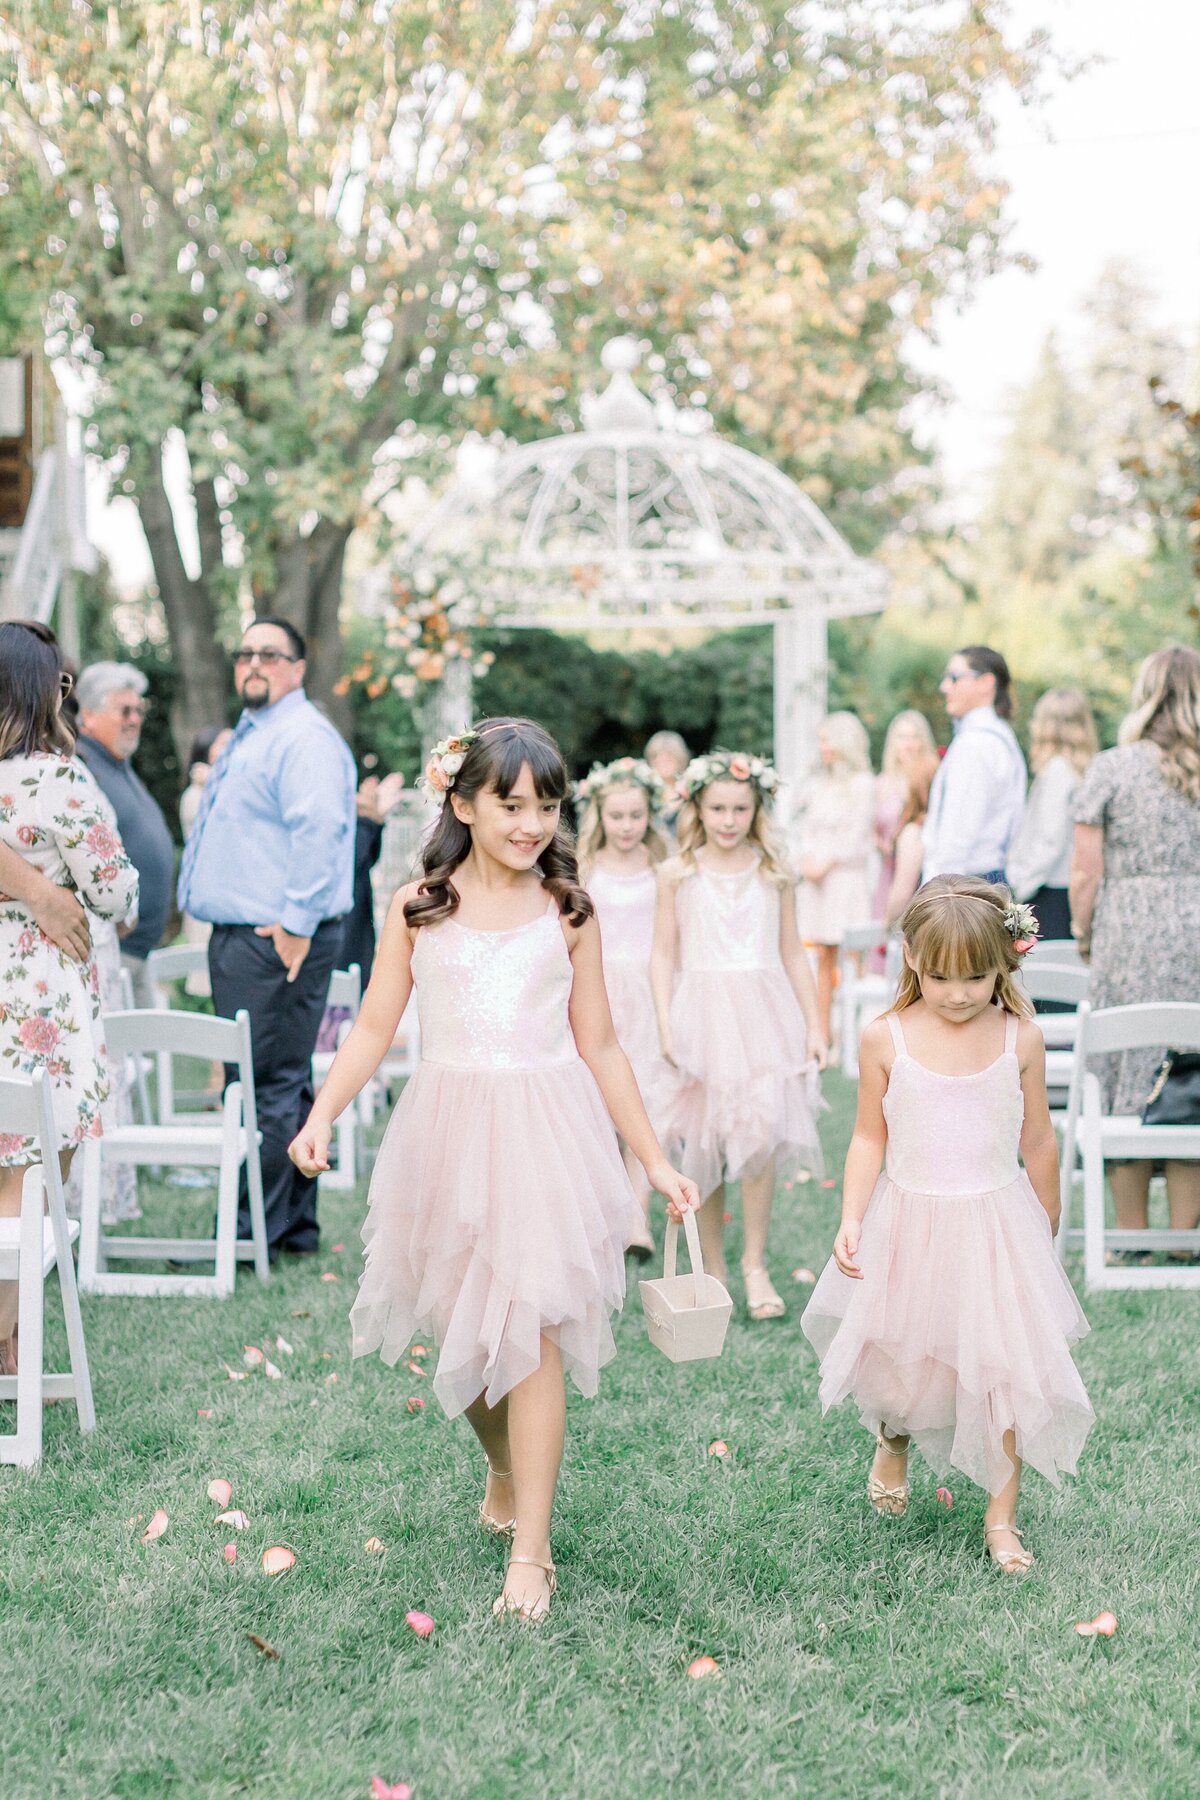 The many flower girls toss floral petals along the aisle.